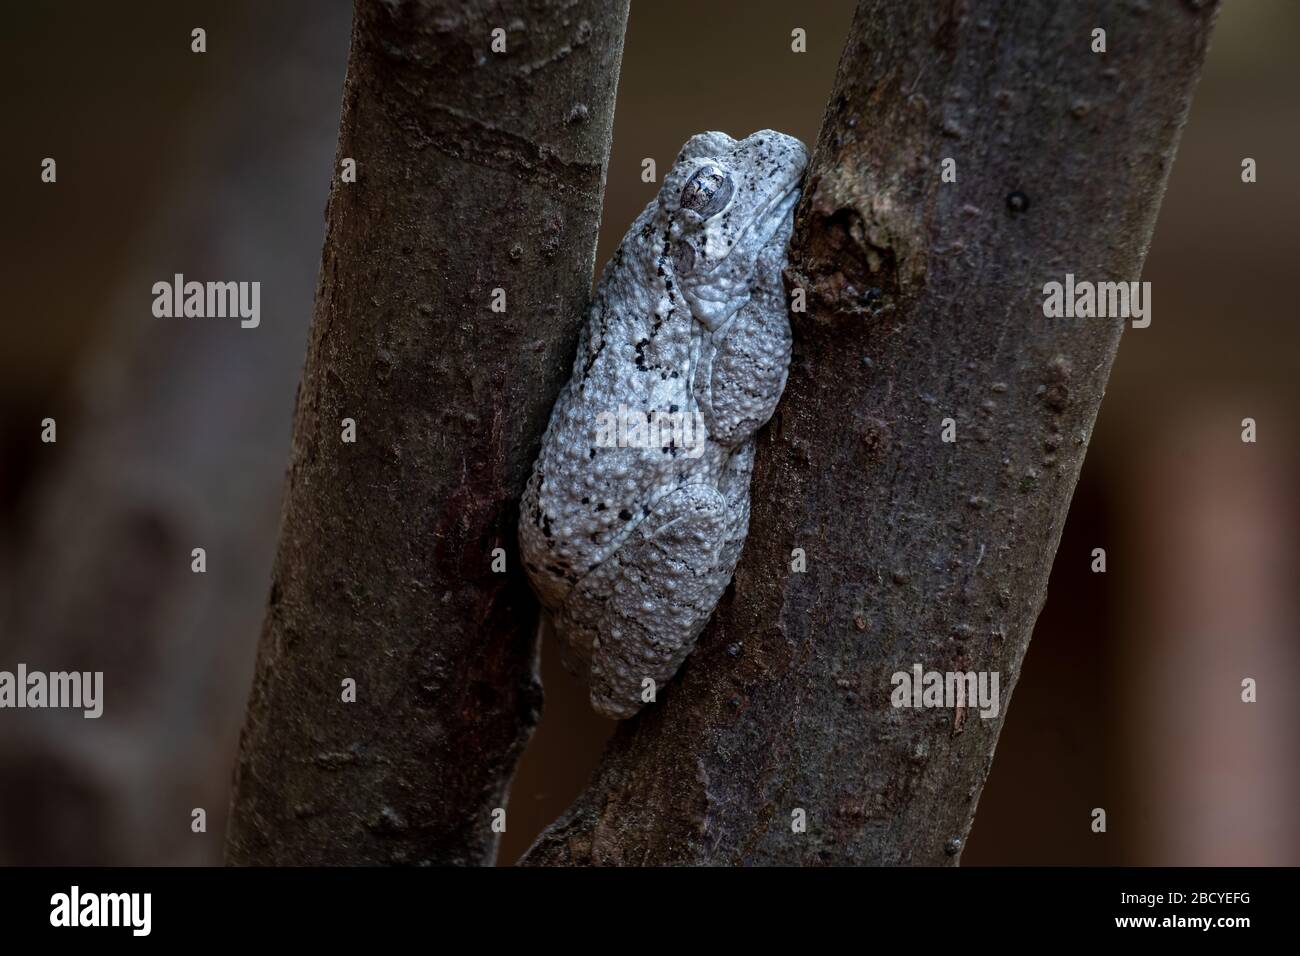 Macro of a Cope's Gray Tree Frog wedged between two limbs. Could be a meme for in a tight spot or stuck at home. North Carolina. Stock Photo